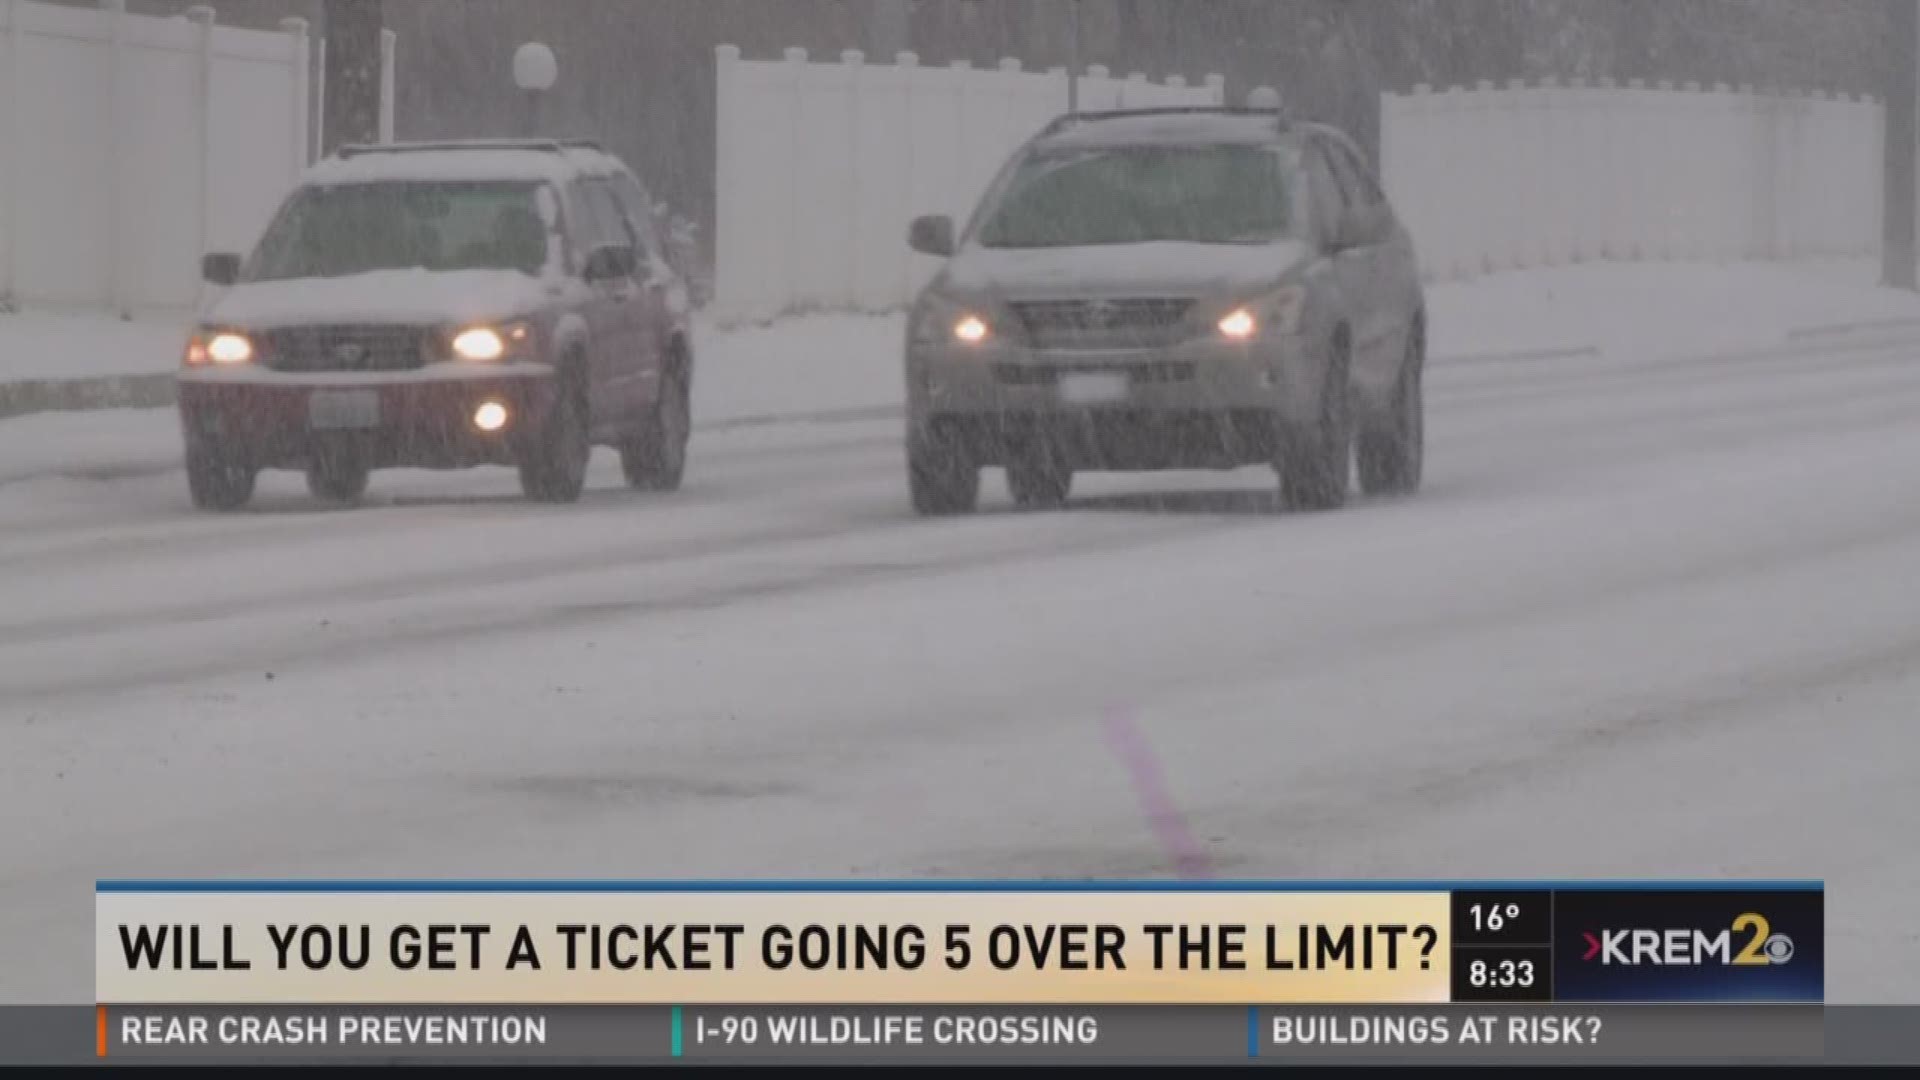 Will you get a ticket going 5 over the speed limit?